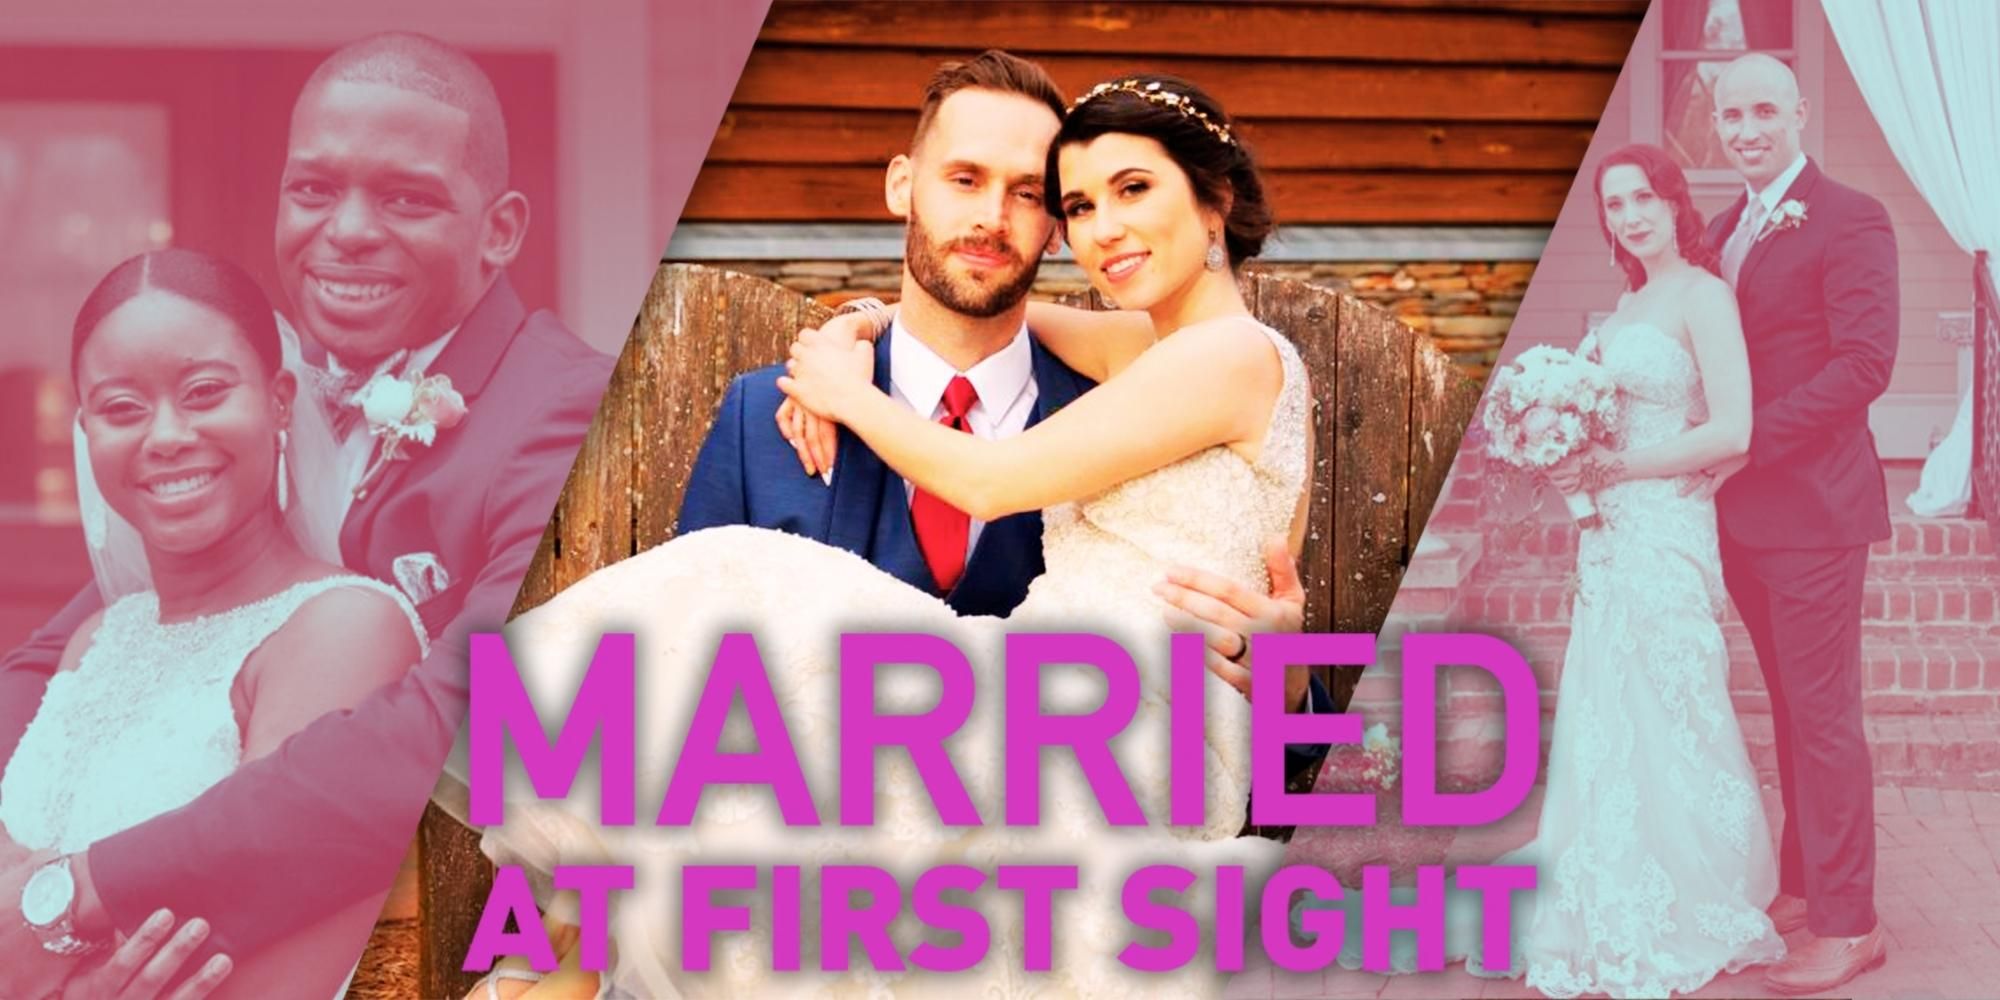 Married At First Sight Season 9 couples